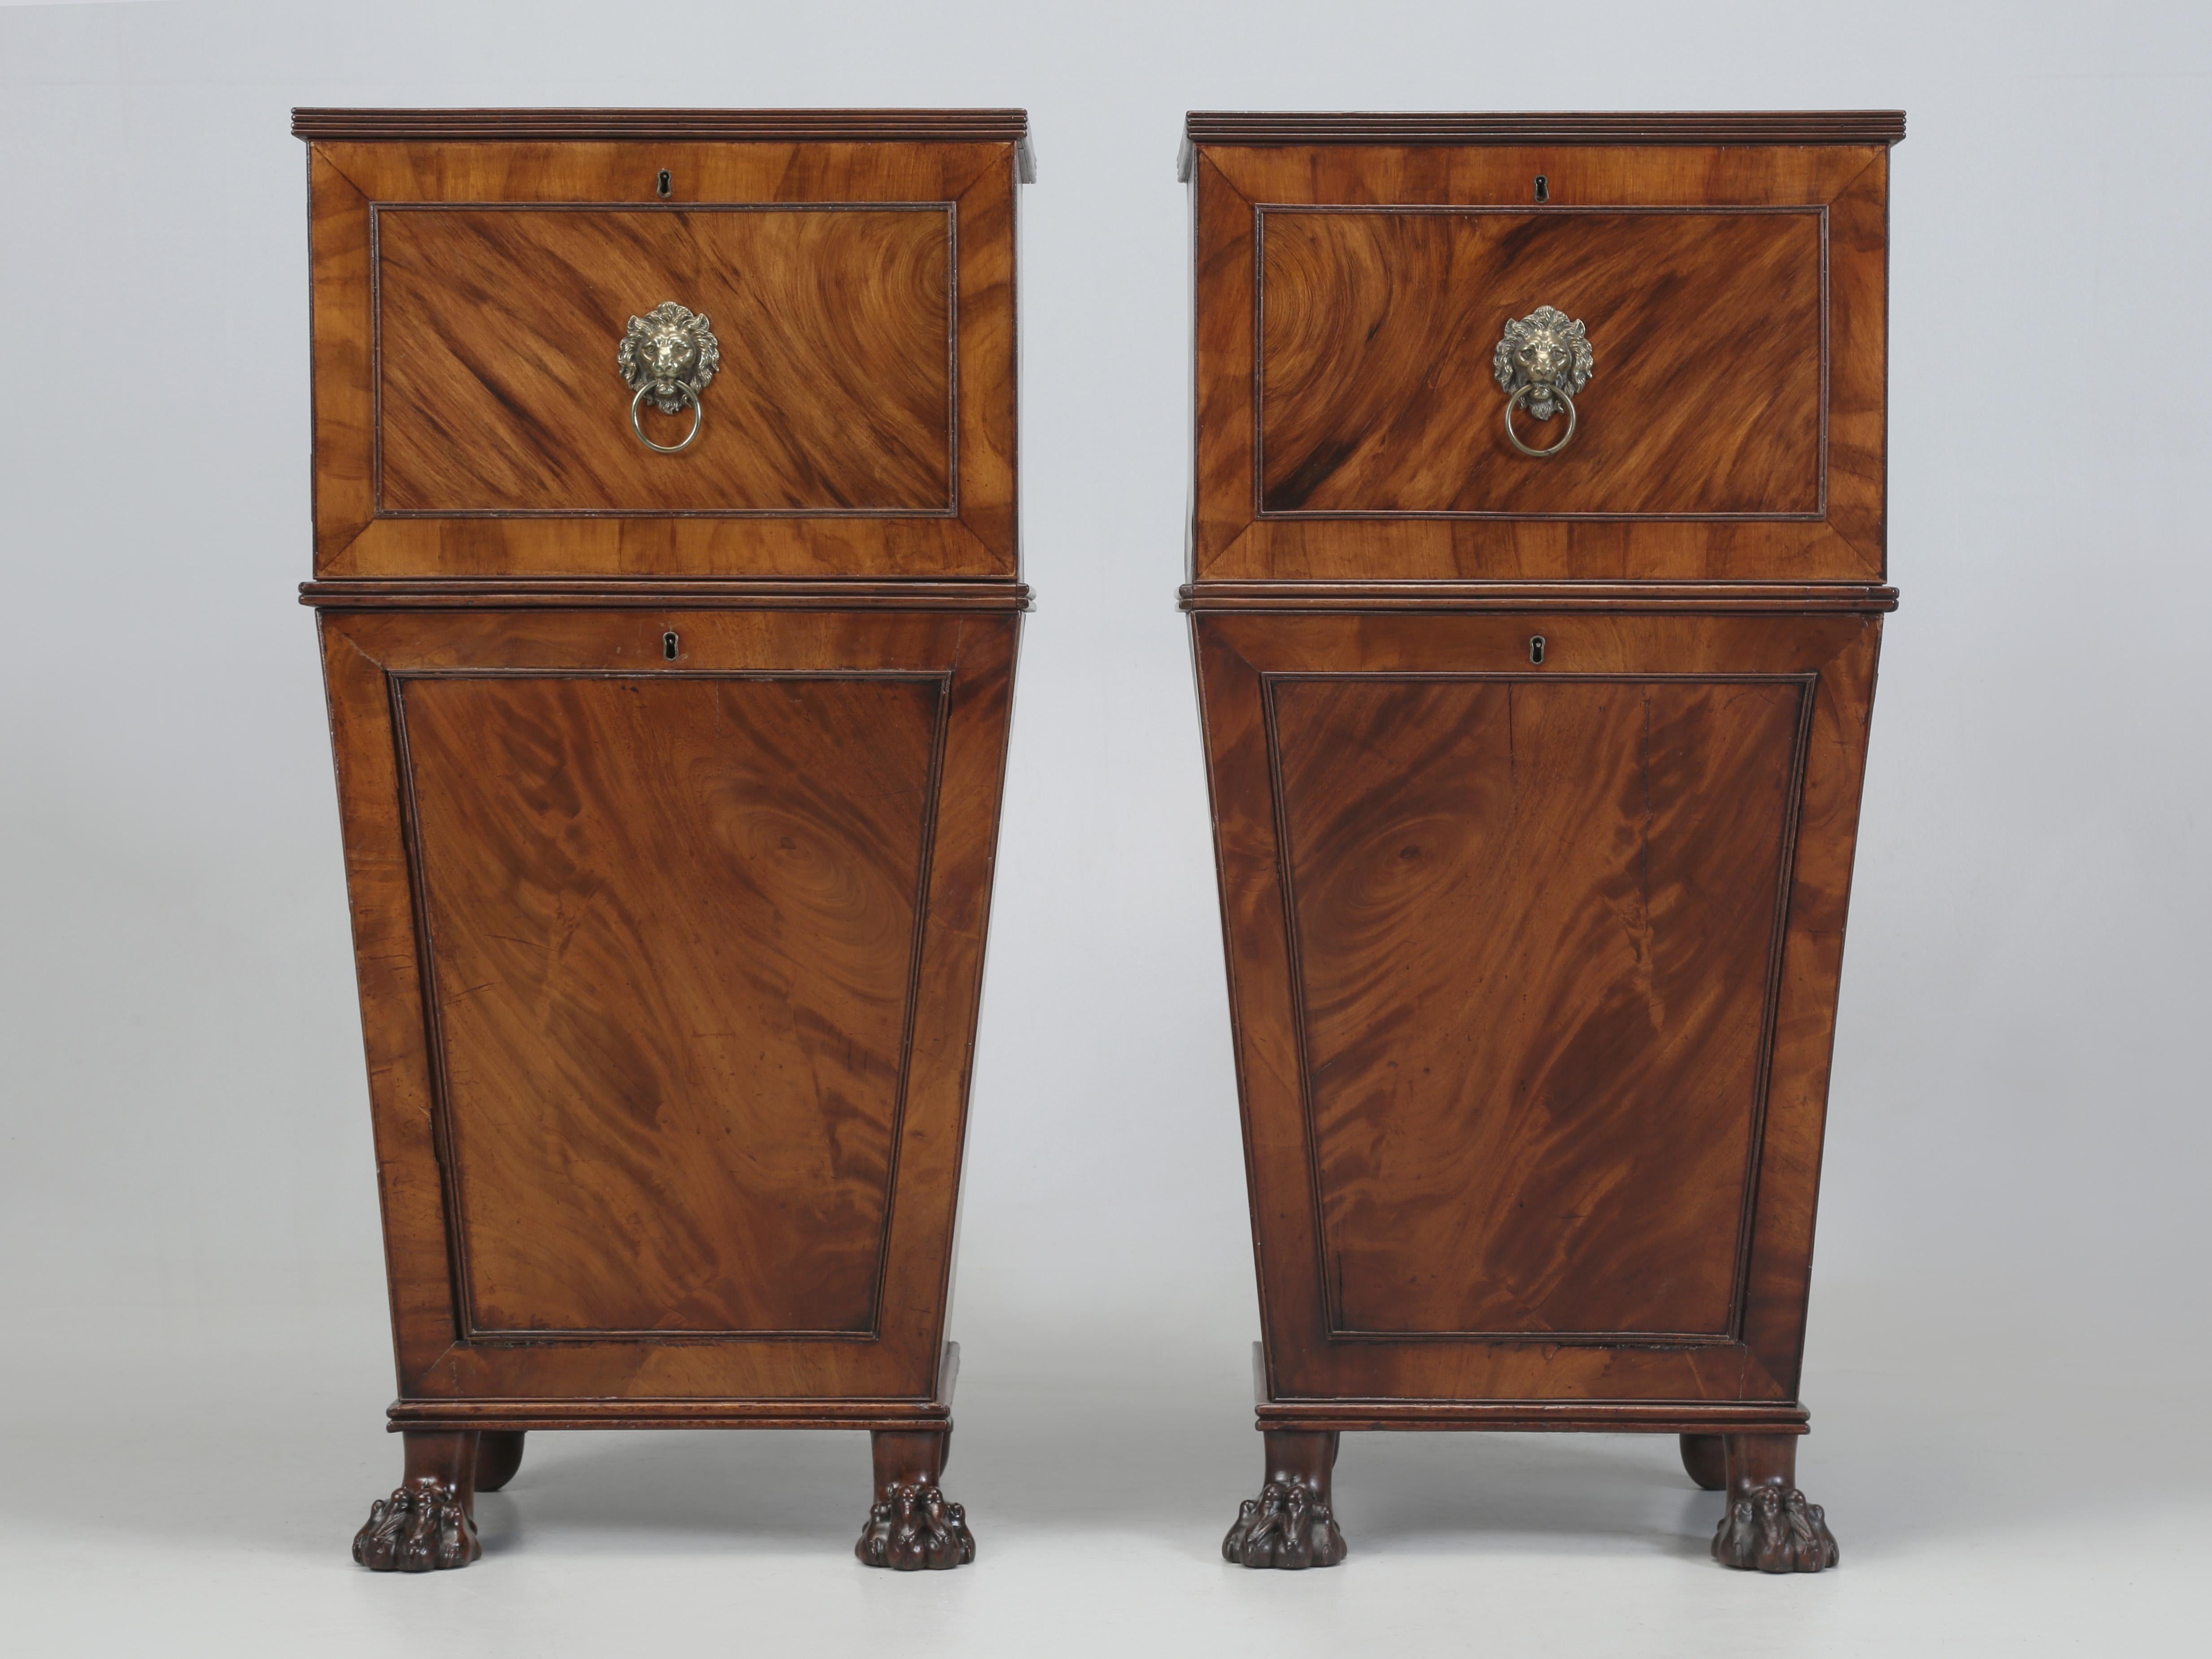 Antique pair of Cellarettes or Liquor Cabinets imported from England, that were generally custom made wooden chests intended to transport or store a small number of alcoholic beverages. Made of finer woods, like mahogany or rosewood and in numerous